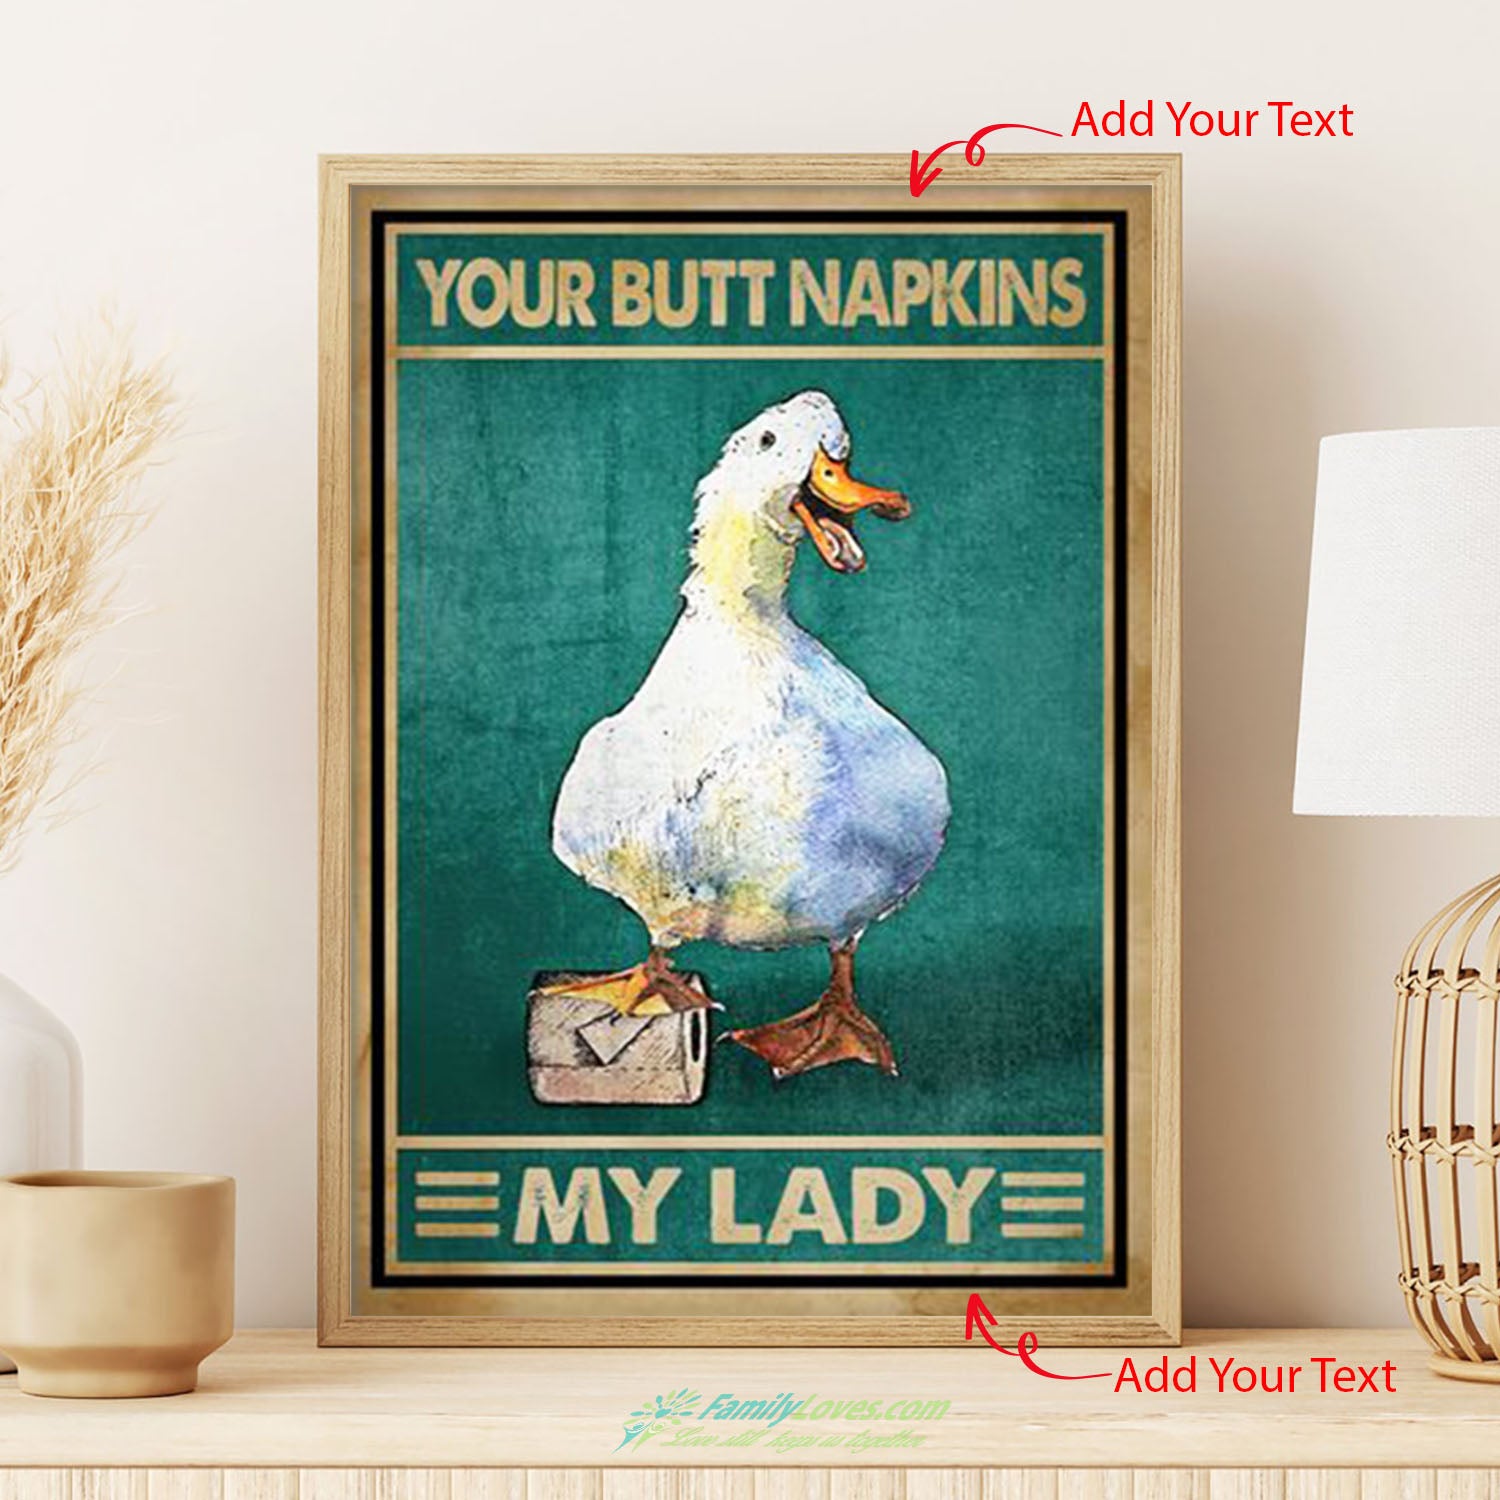 Your Butt Napkins My Lady Noose Canvas Large Poster Hanging All Size 1